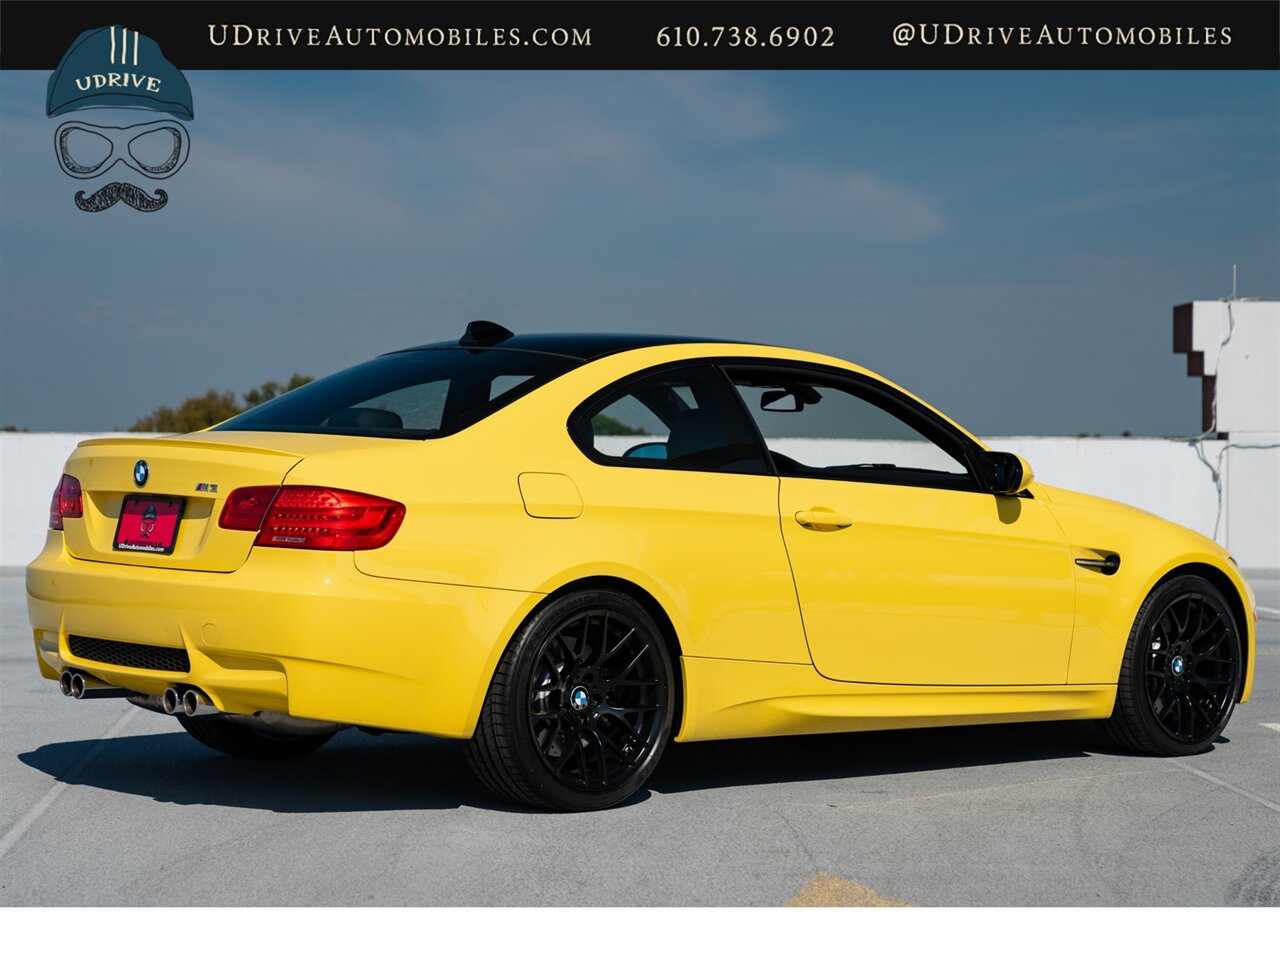 2010 BMW M3  E92 6 Sp Individual Dakar Cloth Seats Carbon Roof No NAV Rod Bearings Replaced - Photo 20 - West Chester, PA 19382